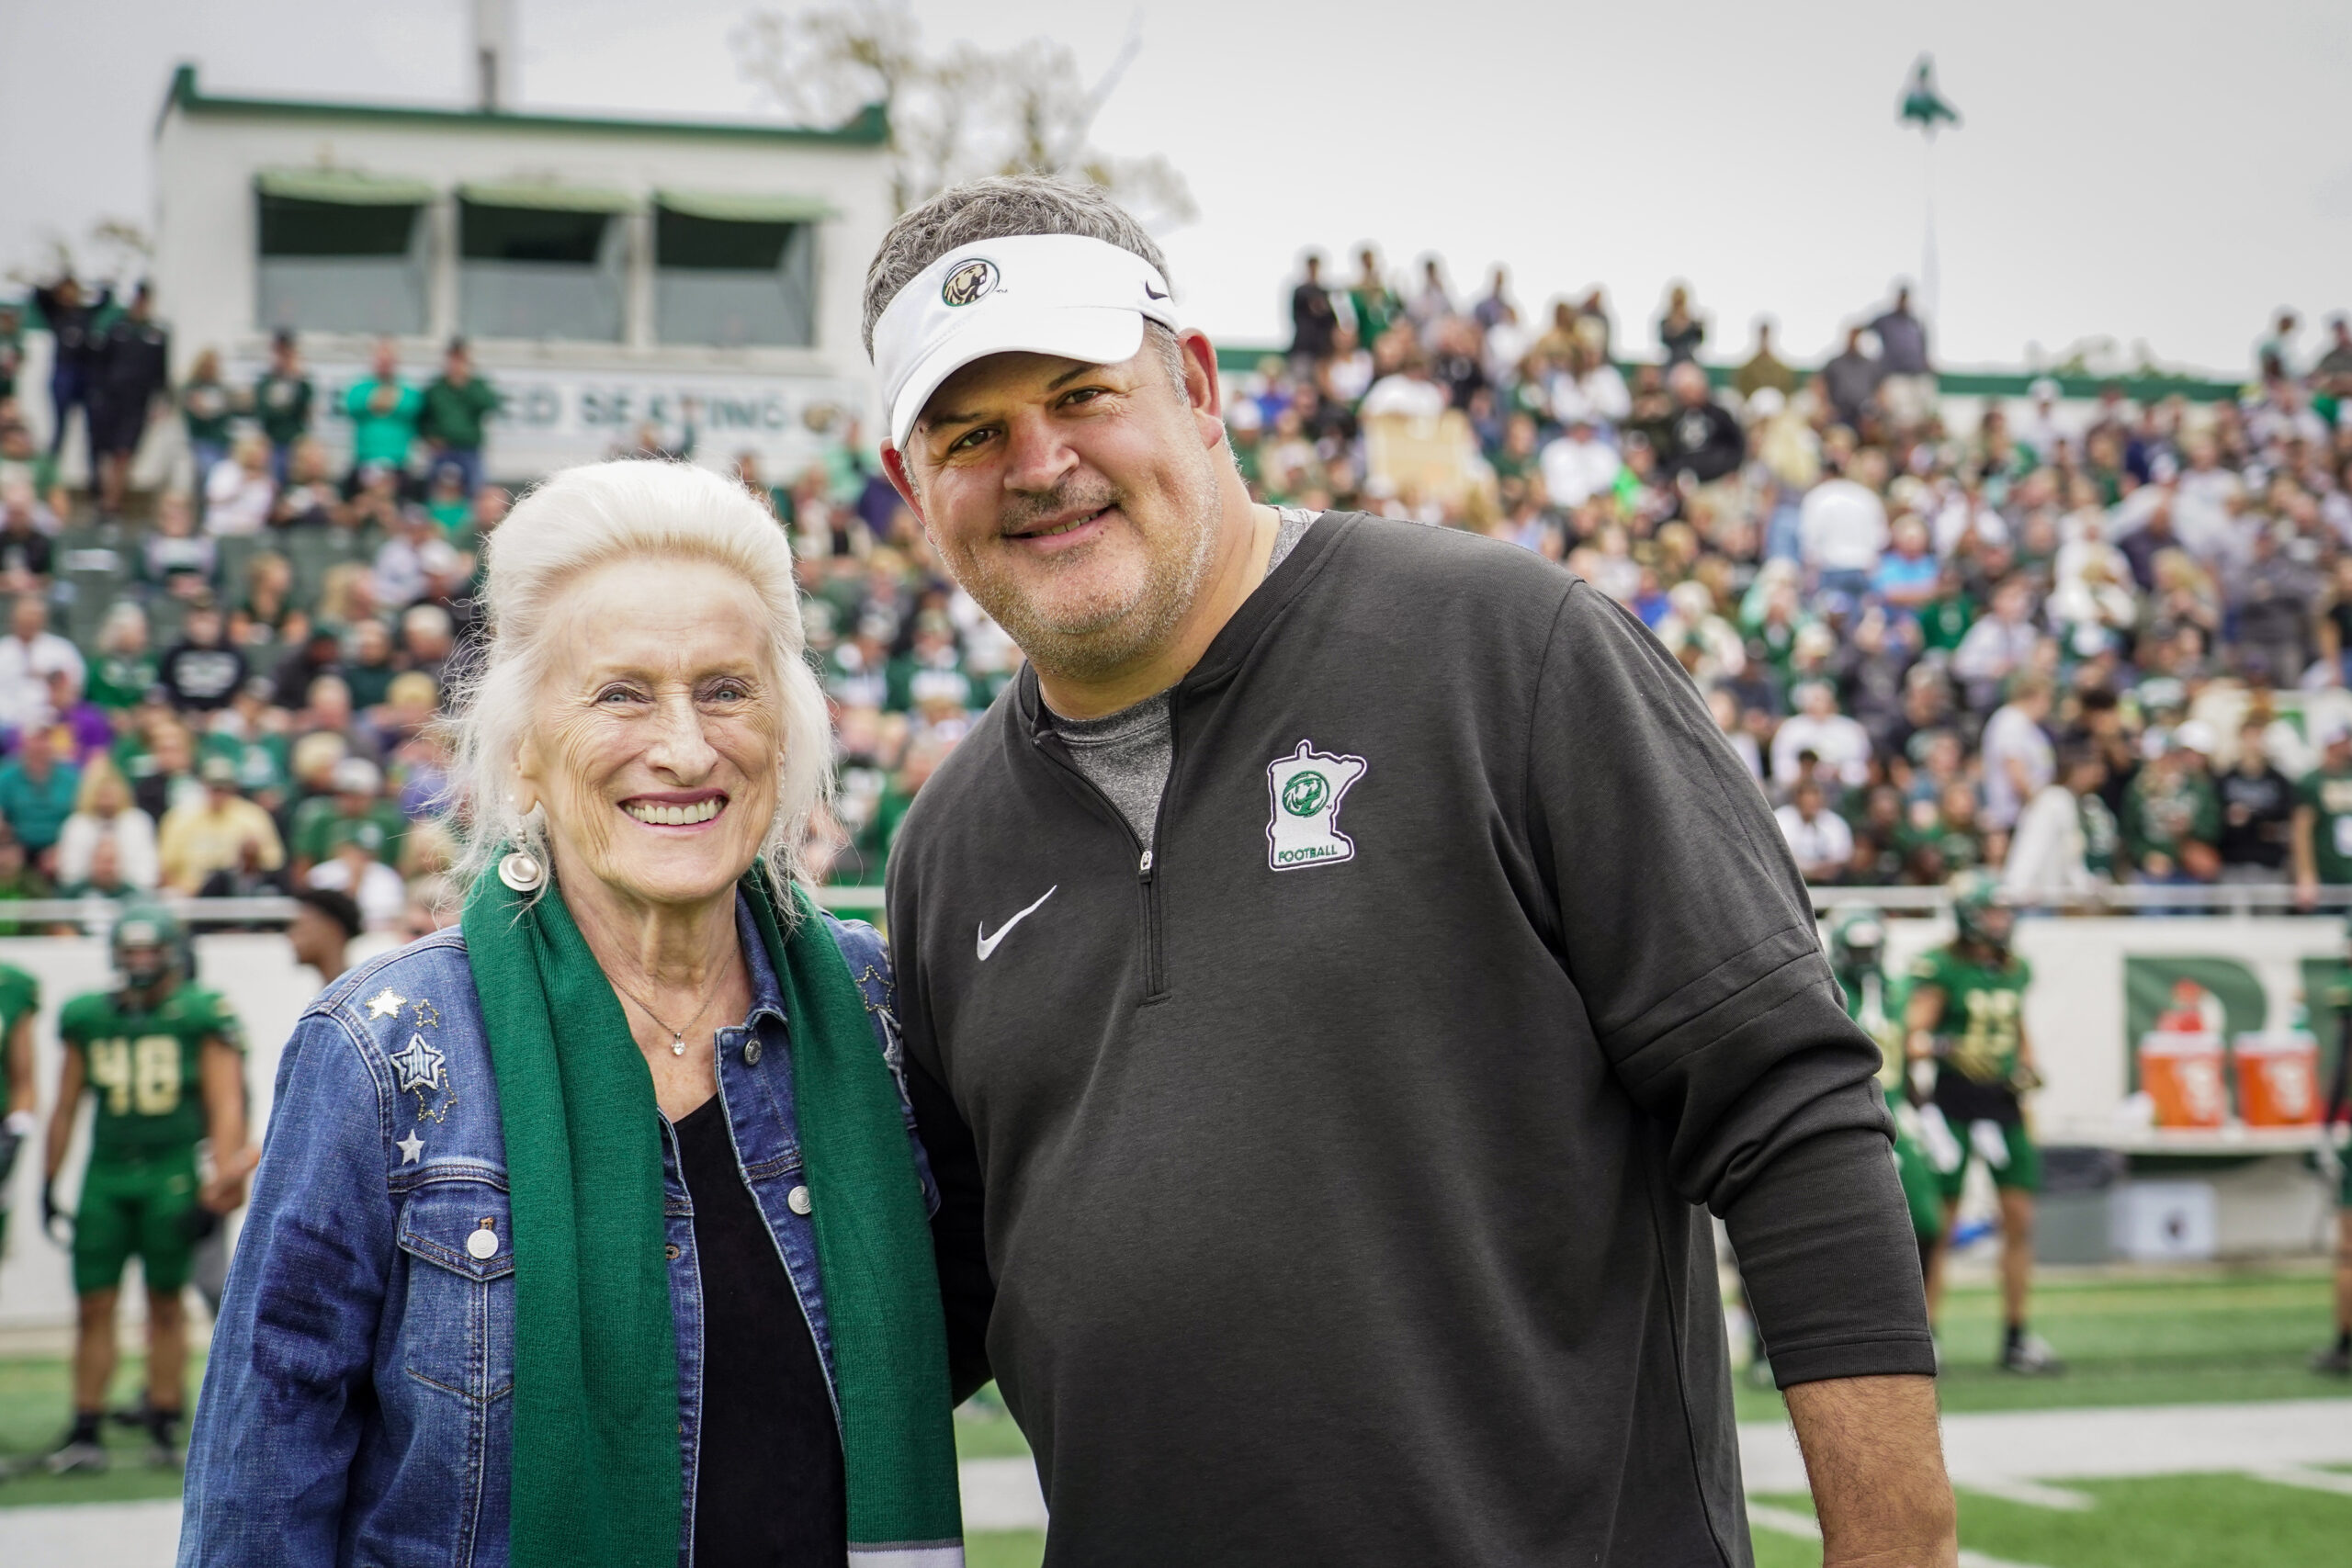 Margaret Laurich, left, with Bemidji State football head coach Brent Bolte before the Homecoming football game against Minnesota State on Saturday, Sept. 30, 2023, at Chet Anderson Stadium. (Micah Friez / Bemidji State)